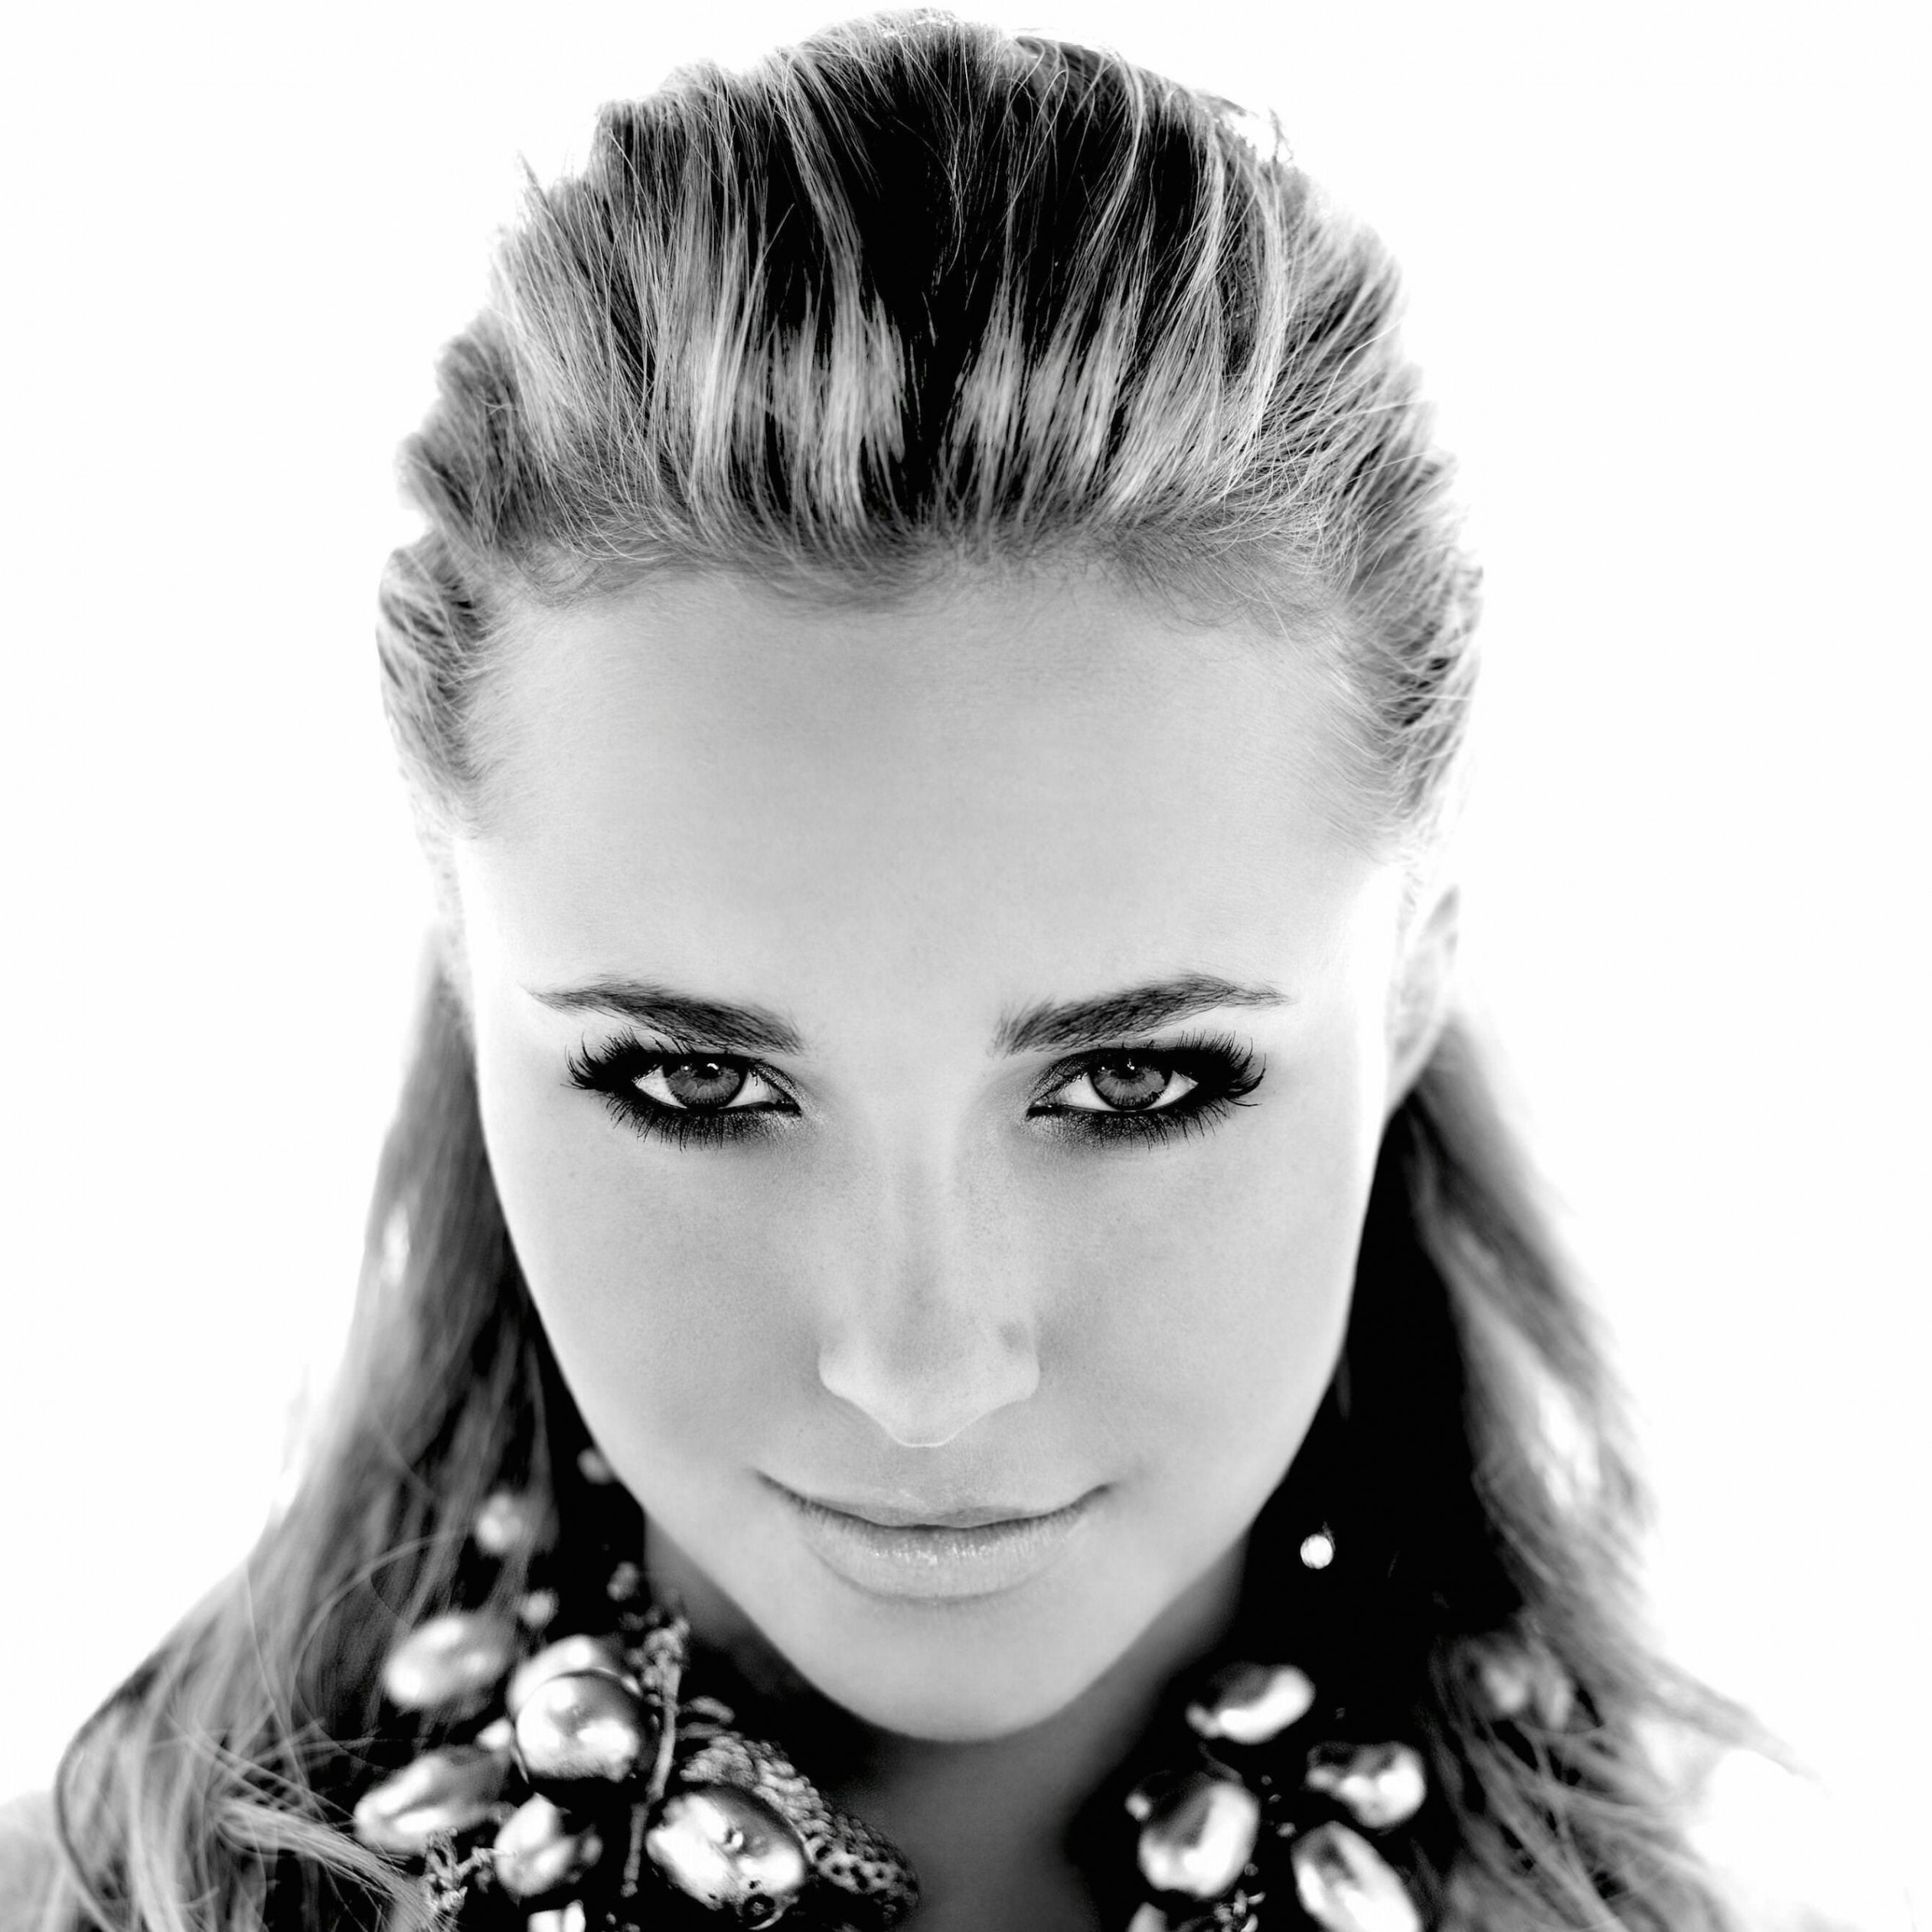 Hayden Panettiere In Black & White Wallpaper for Apple iPad Air